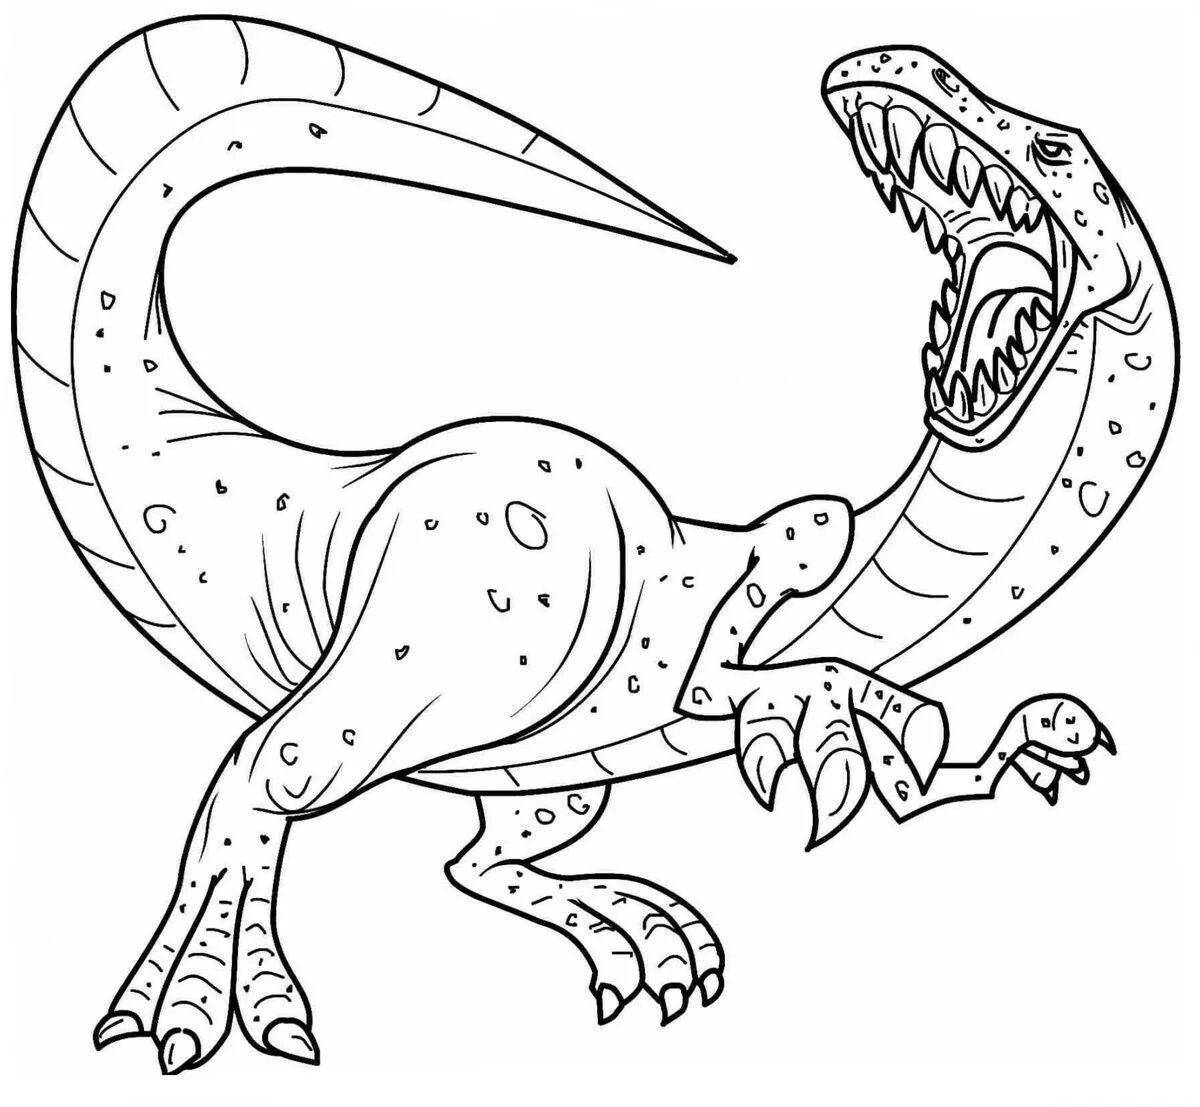 Coloring dinosaurs for children 5 years old